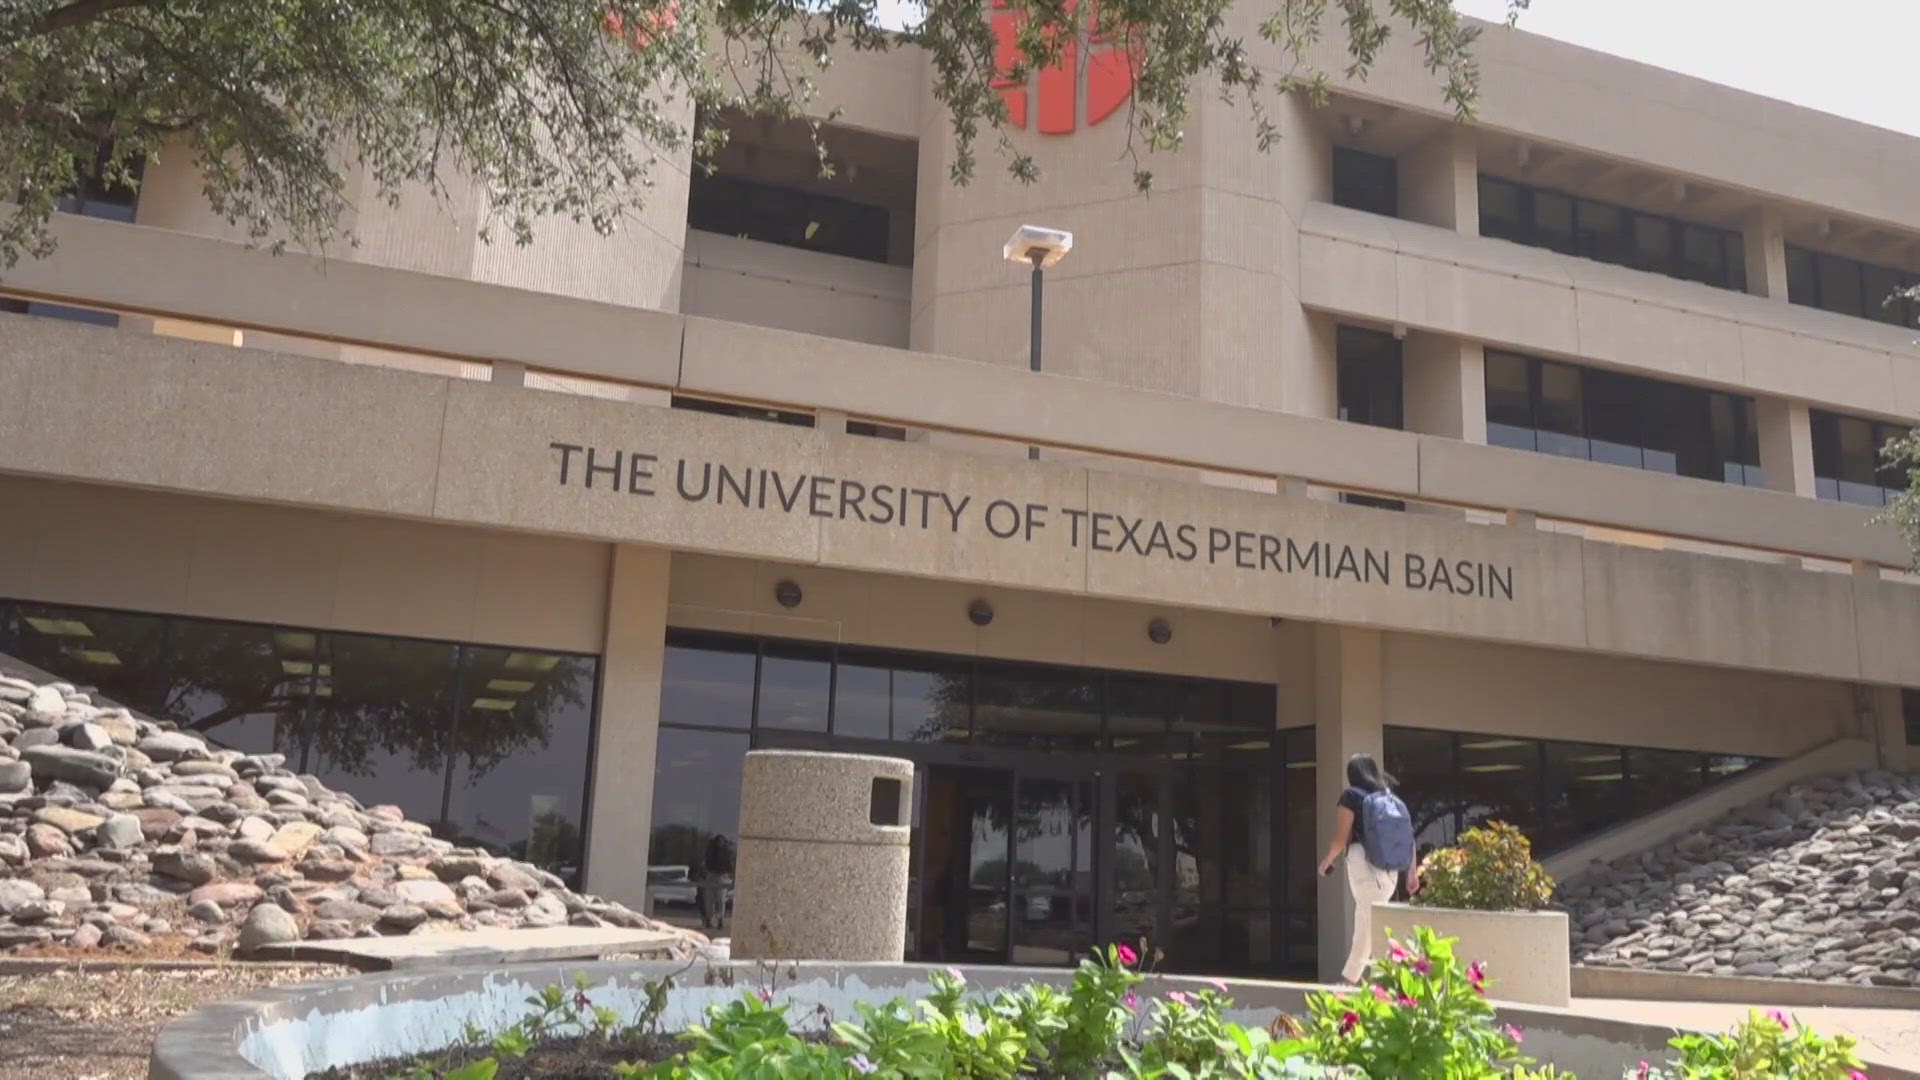 The university proposed a two-year contract with both the Midland and Odessa Development Corporation to help fund the SAS Workforce Analytics Project.